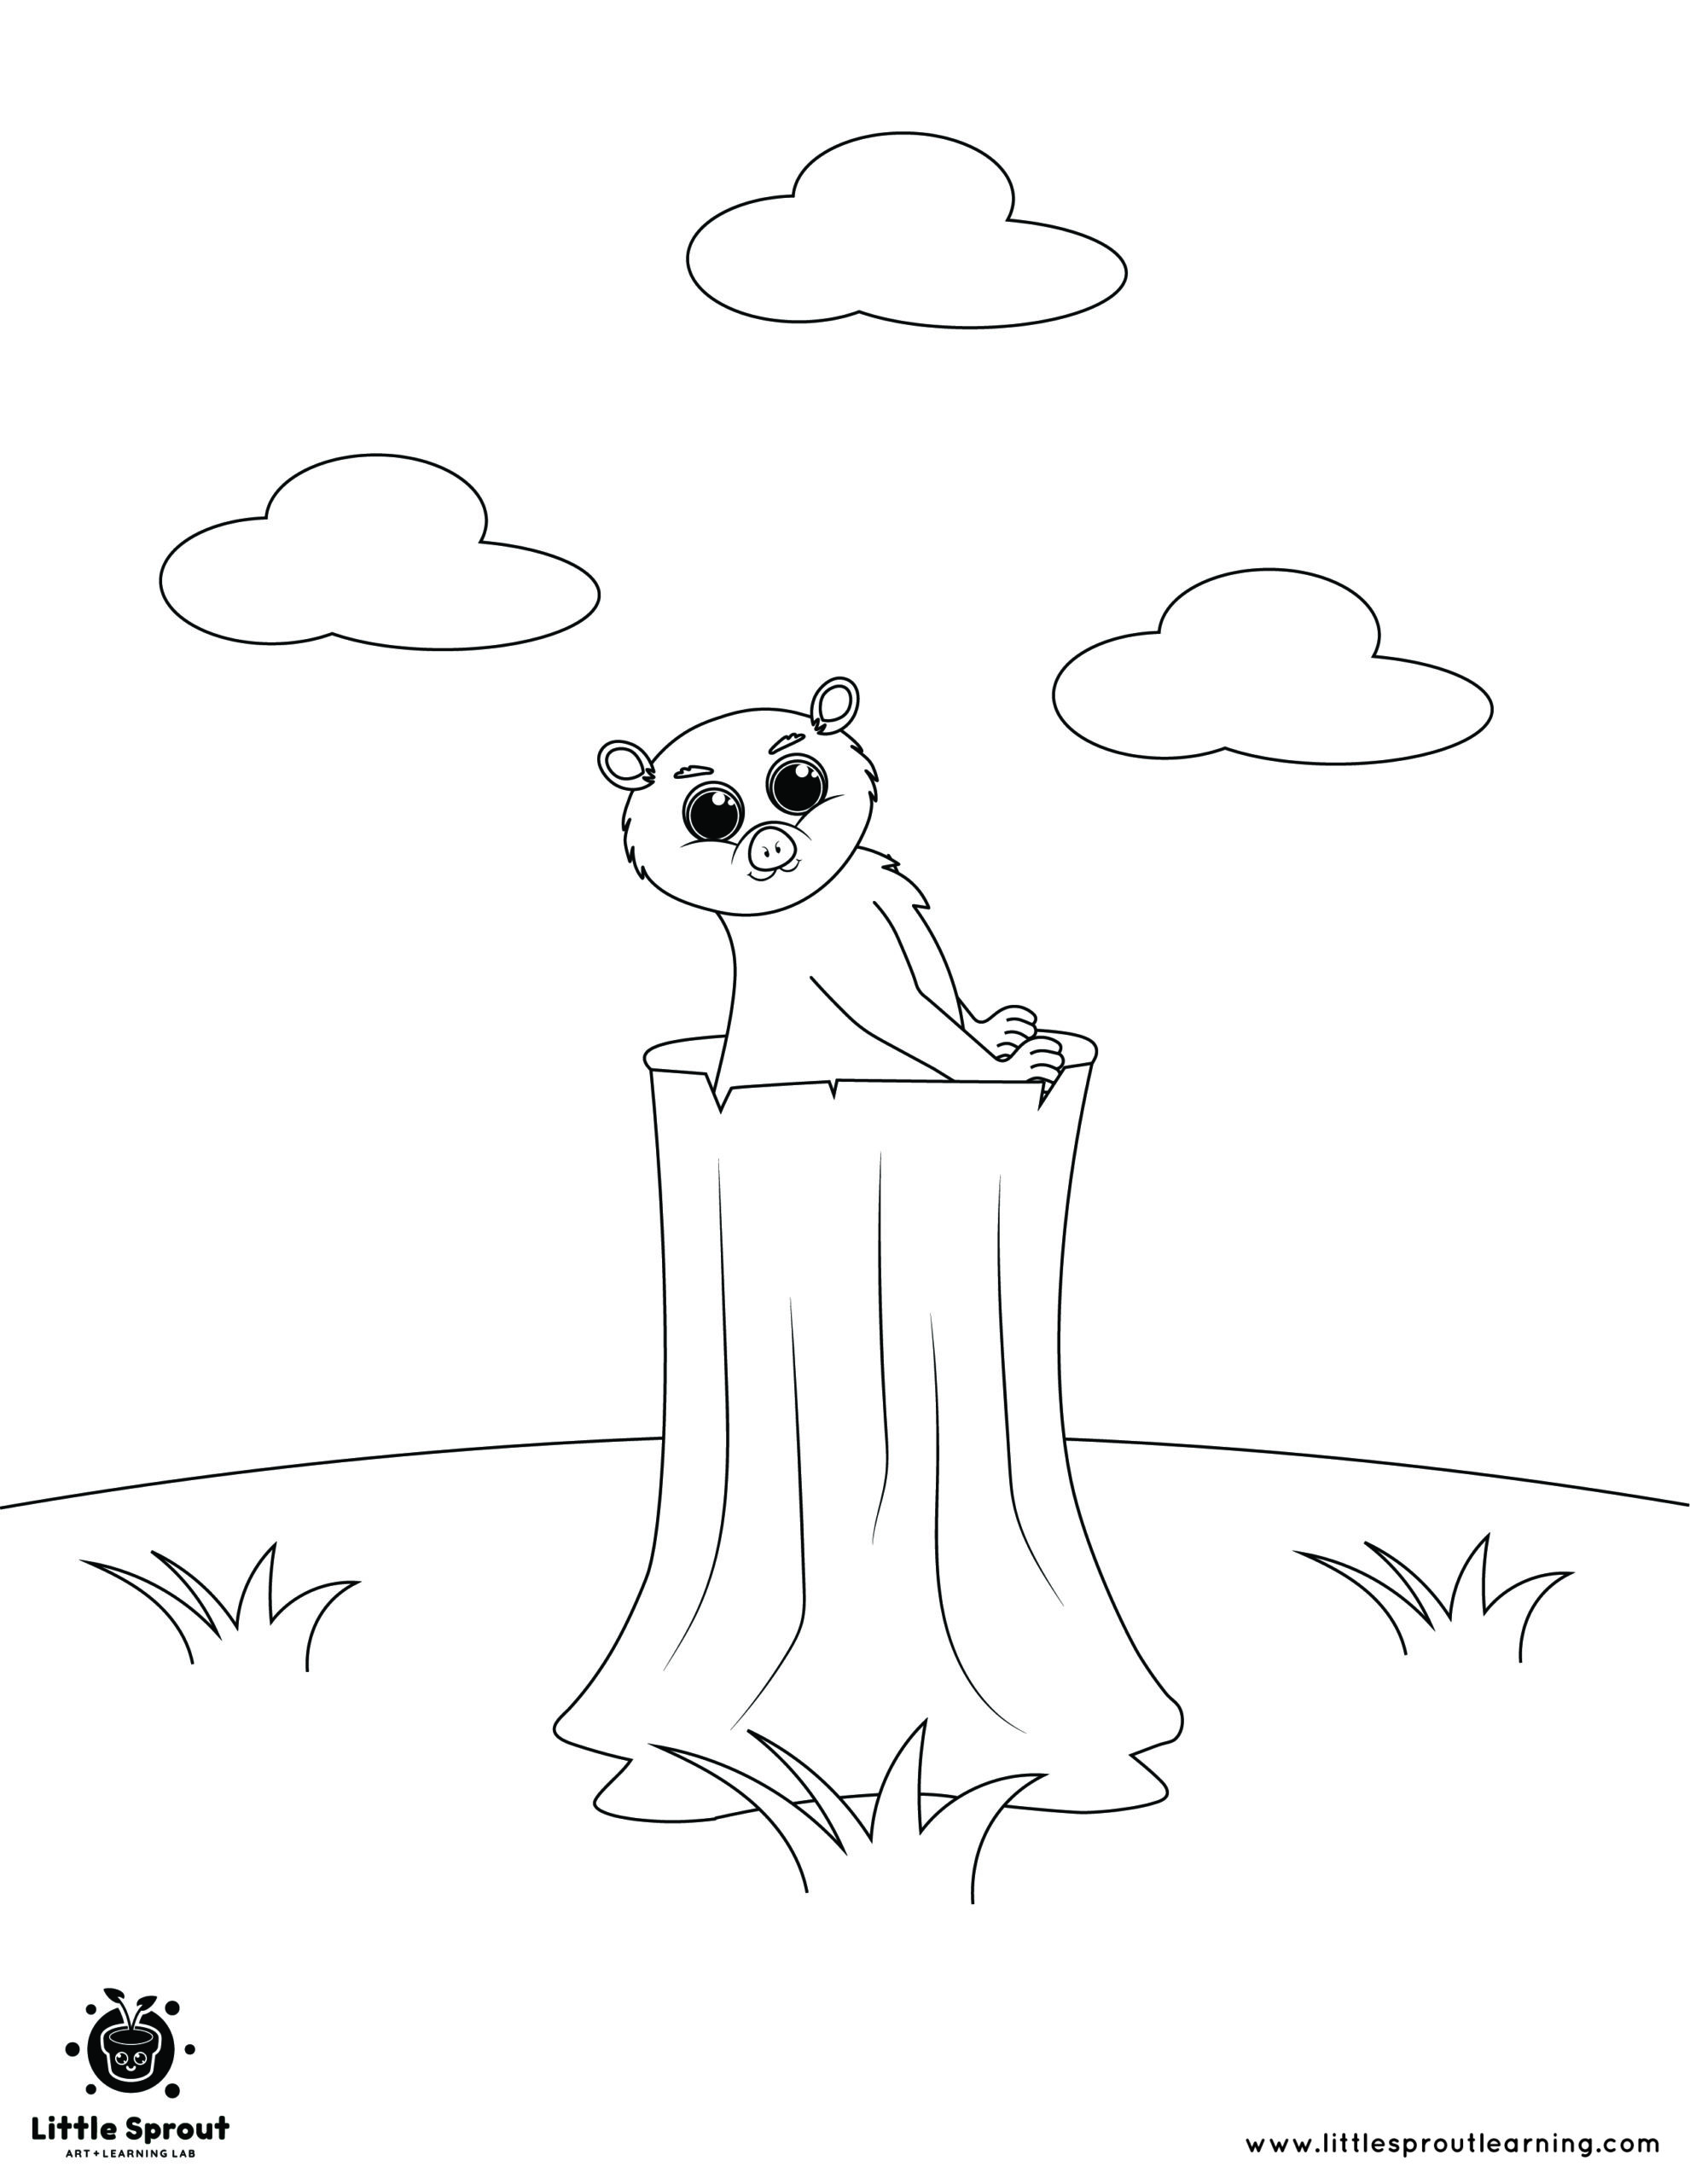 Fat Tailed Lemur in the Stump – Hibernating Animals Coloring Page